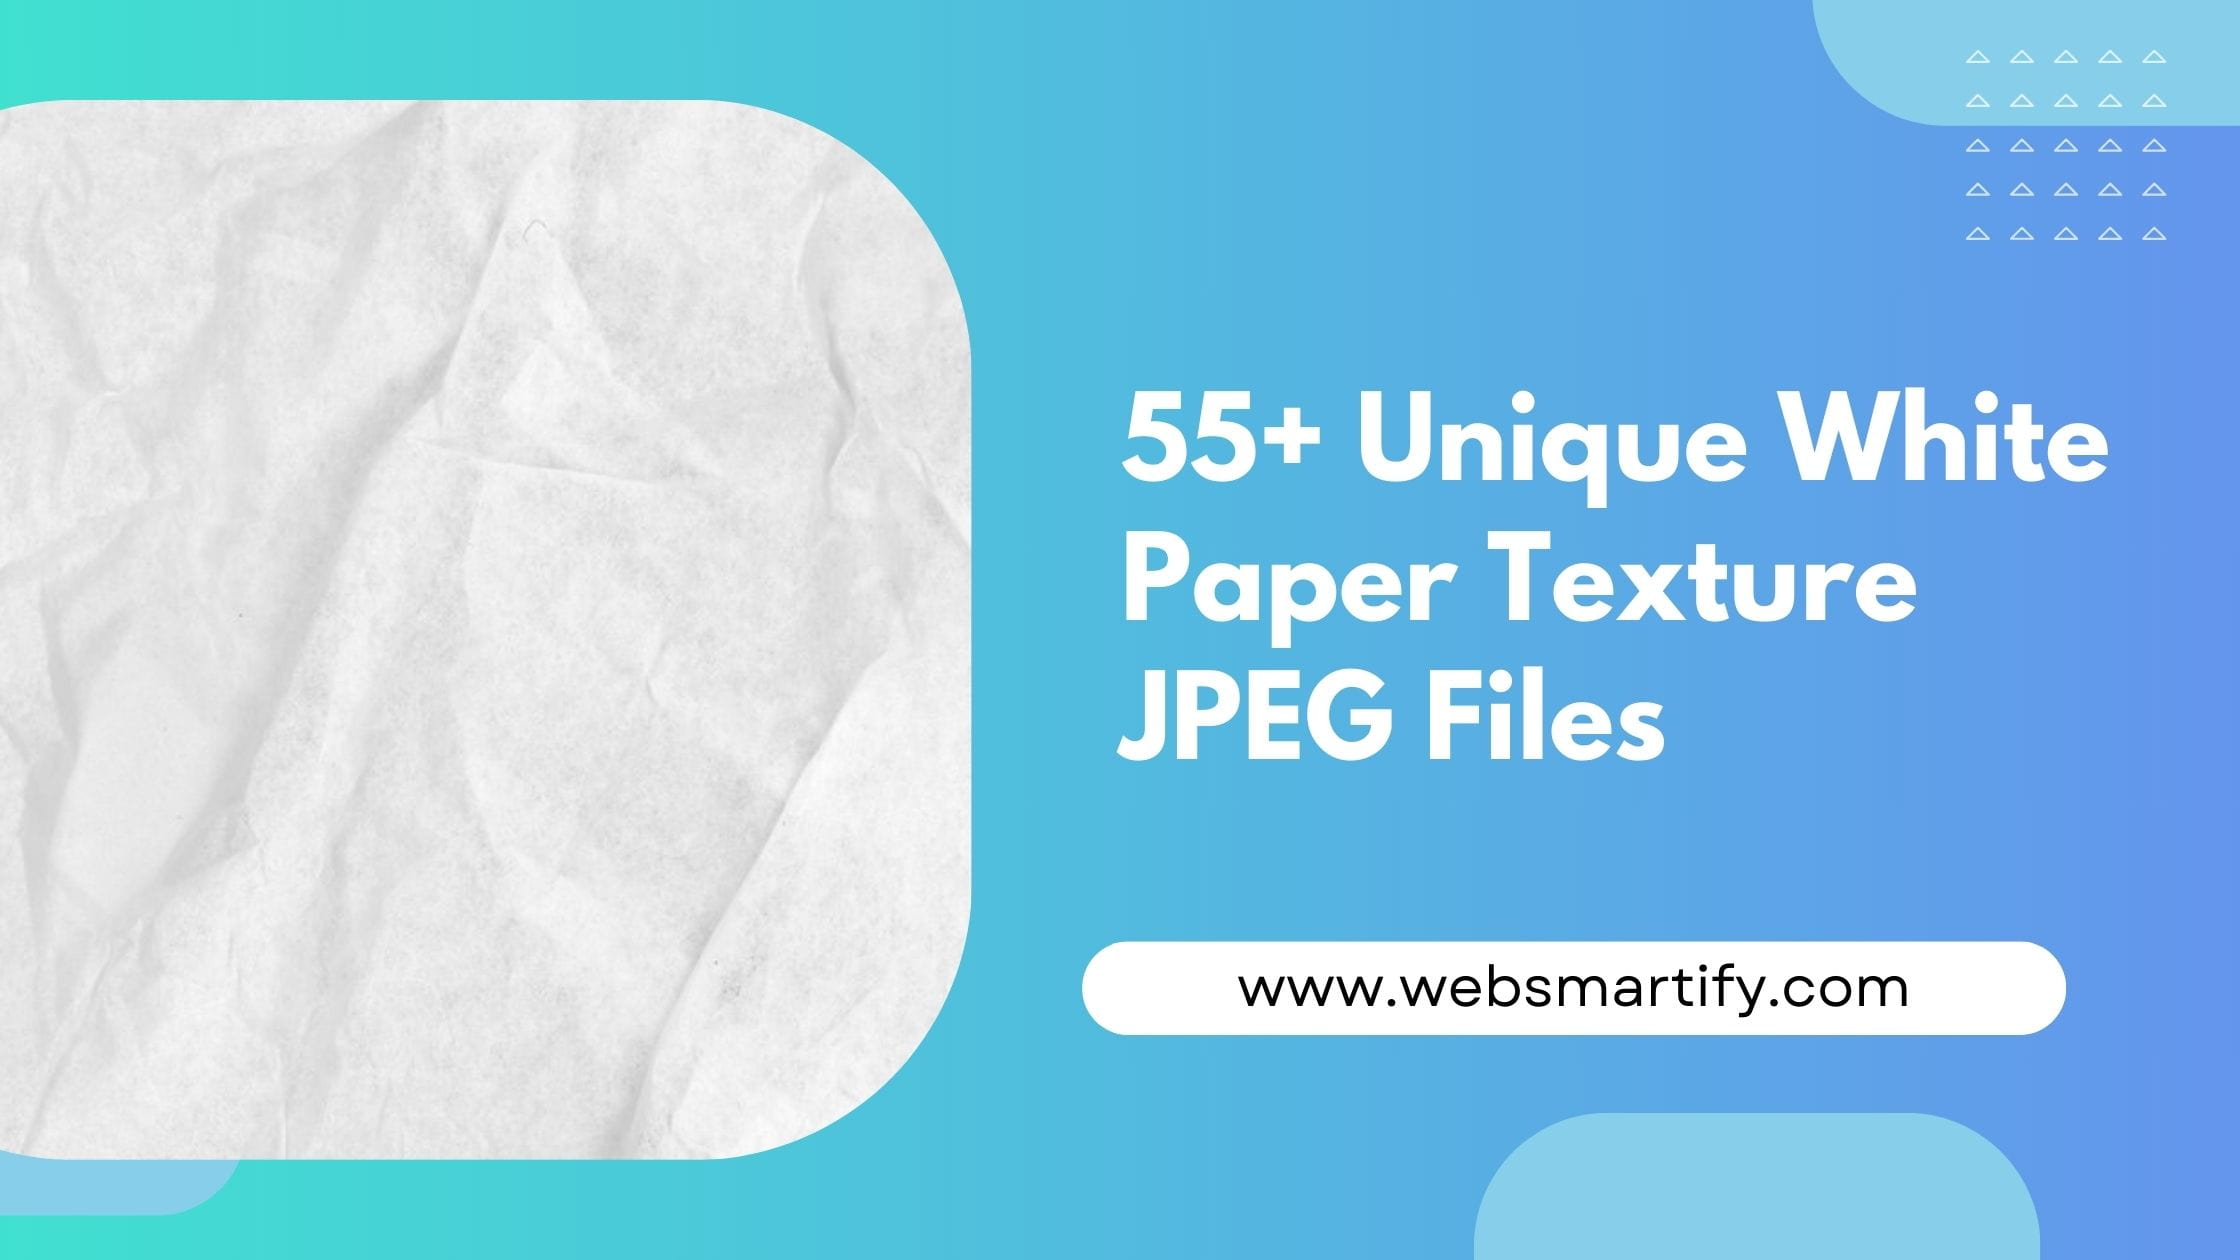 Discover the White Paper Texture collection for graphic designers - Websmartify